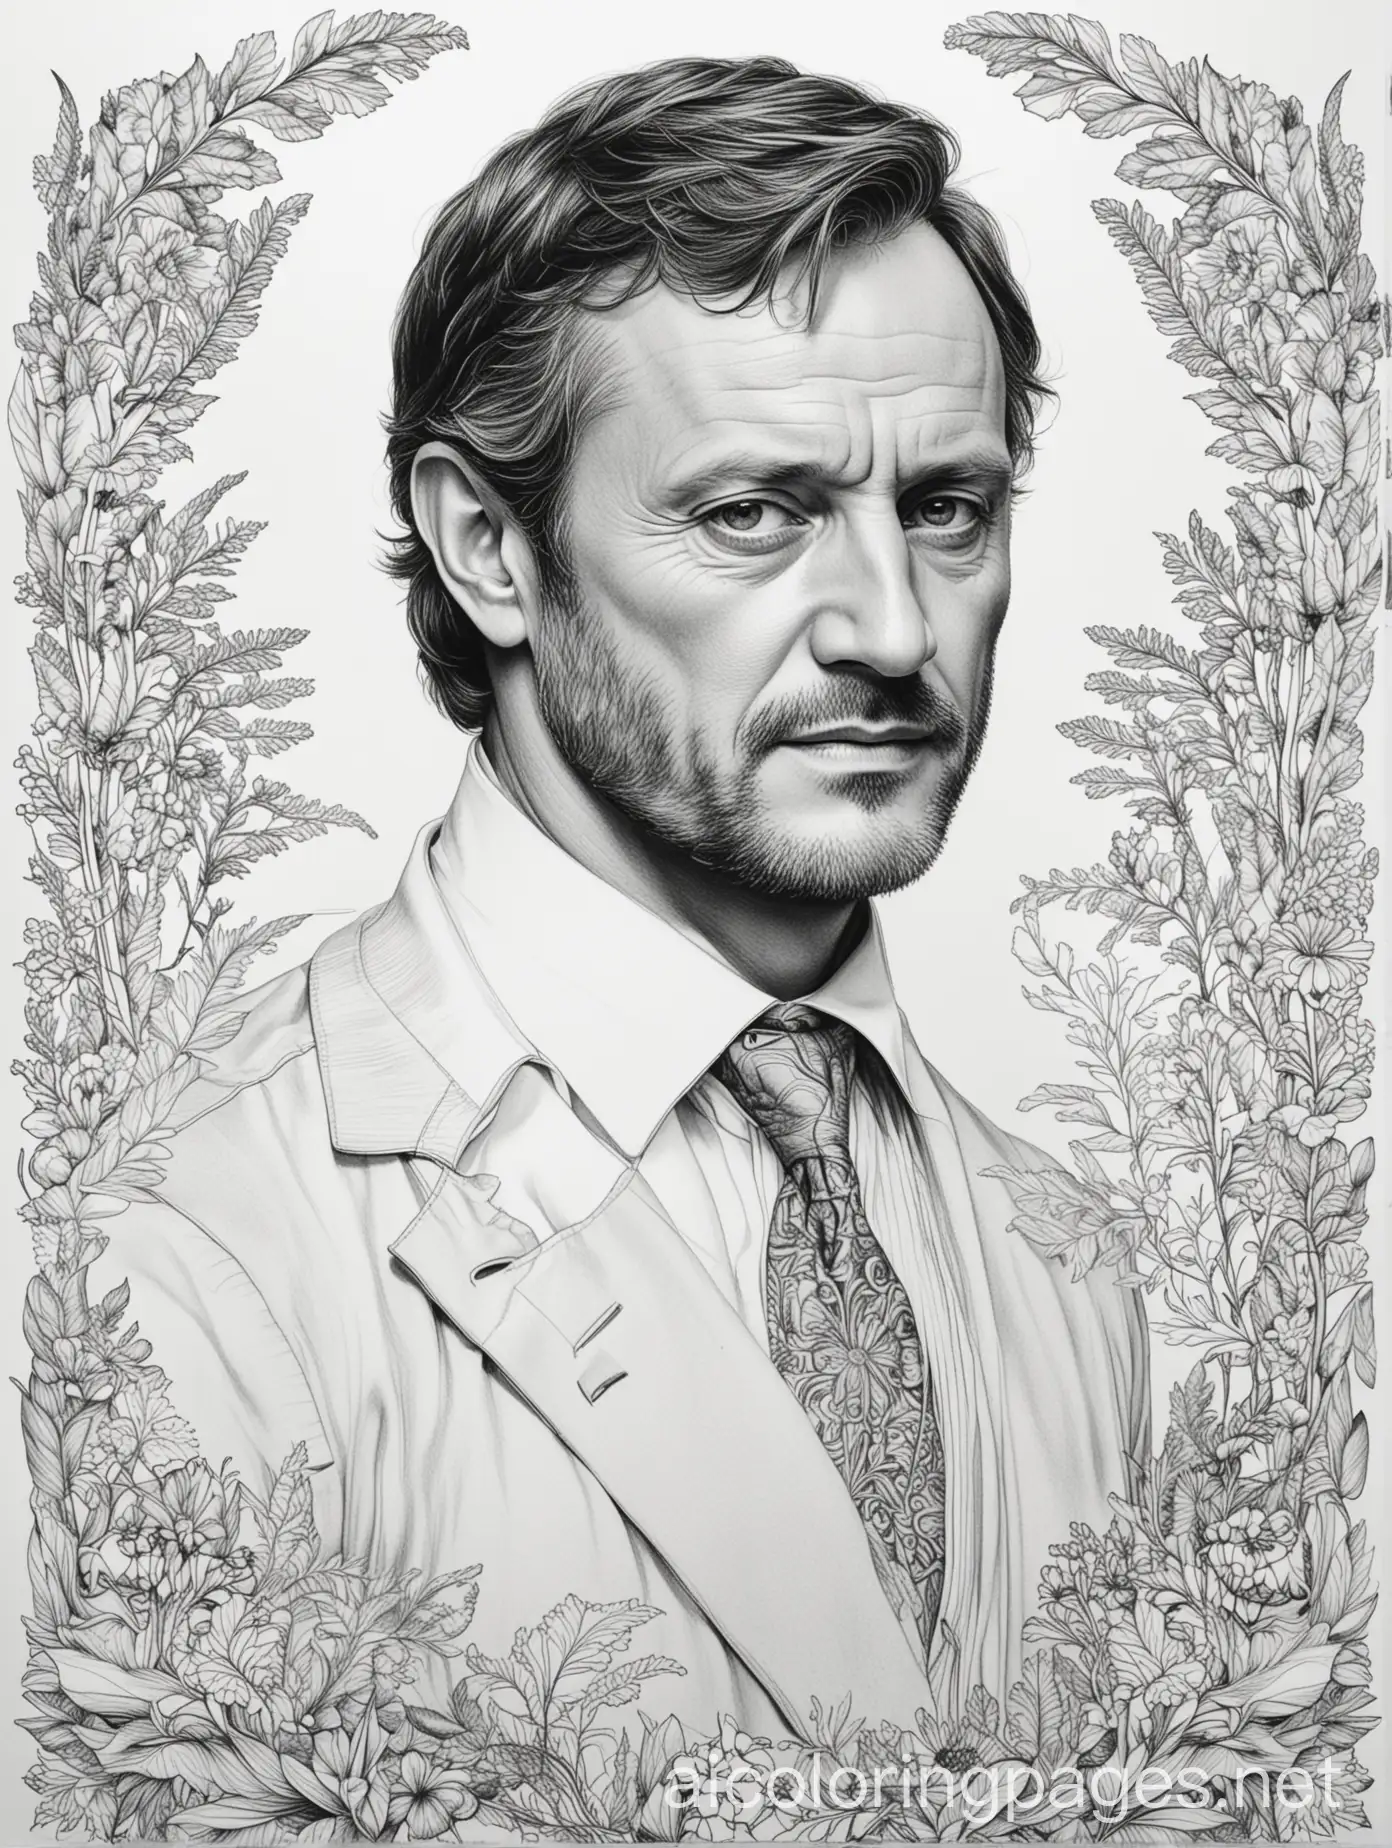 Hannibal-Coloring-Page-in-Black-and-White-with-Simplicity-and-Ample-White-Space